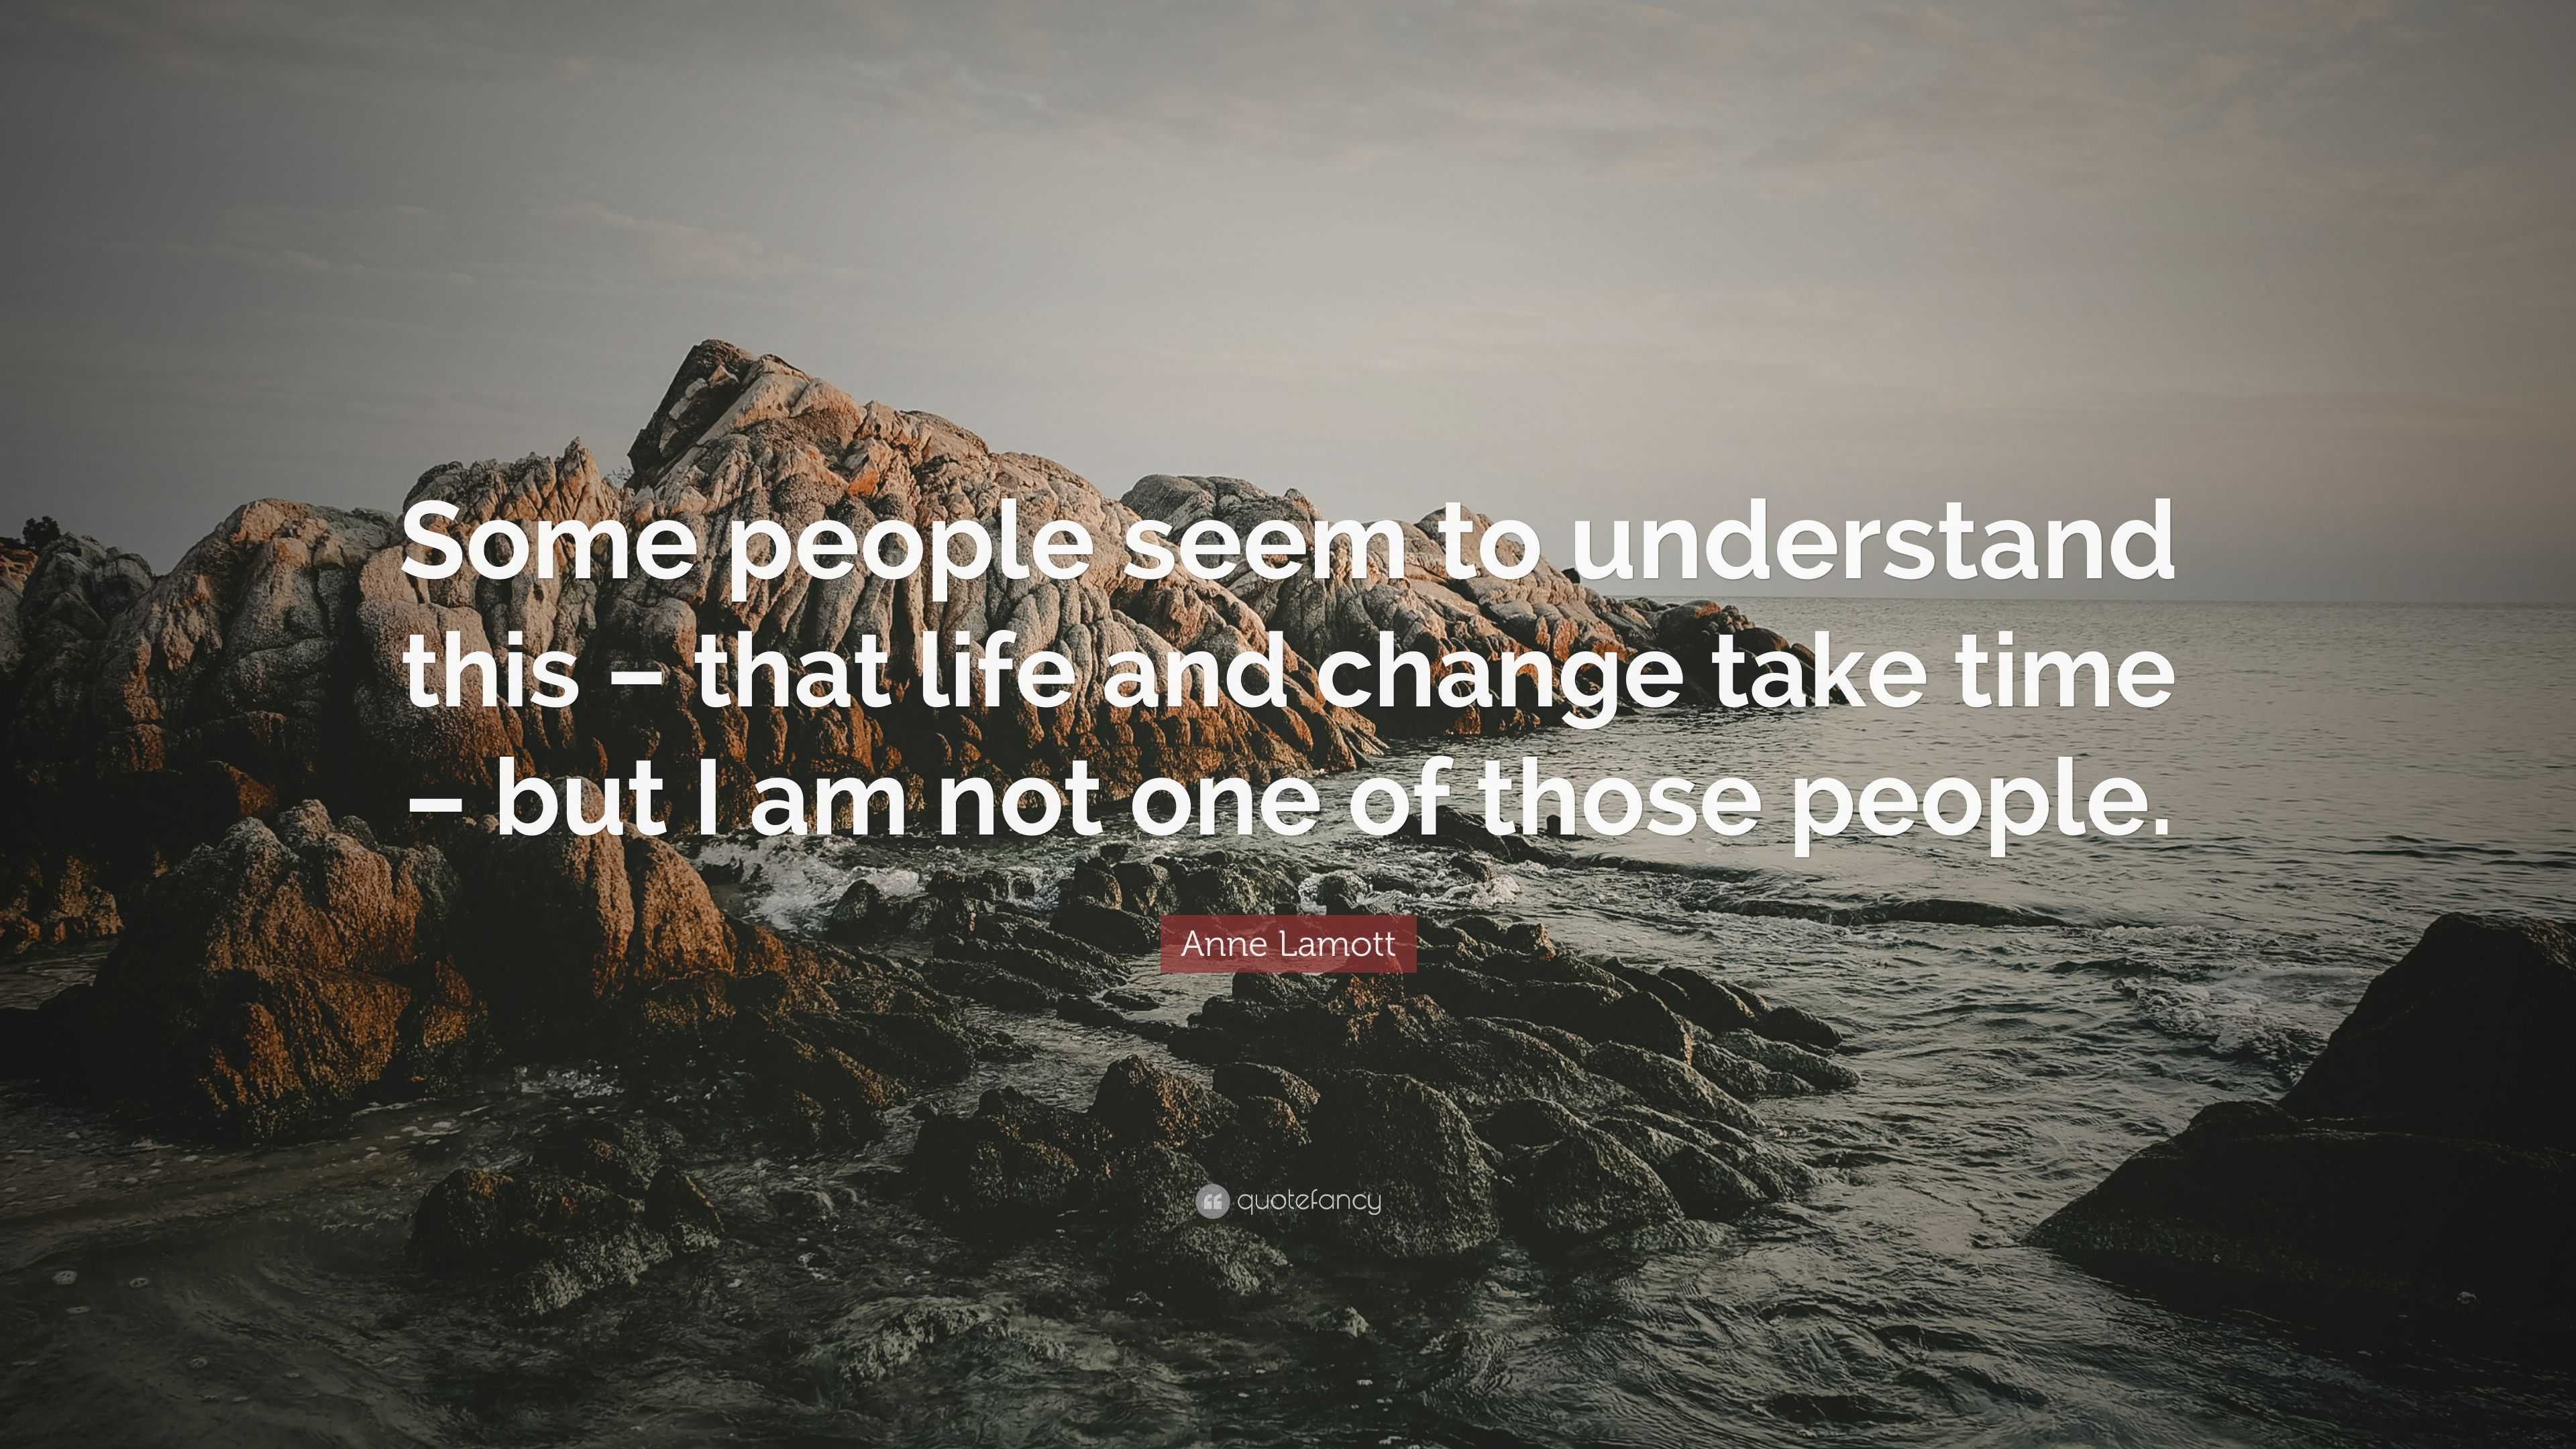 Anne Lamott Quote: “Some people seem to understand this – that life and ...